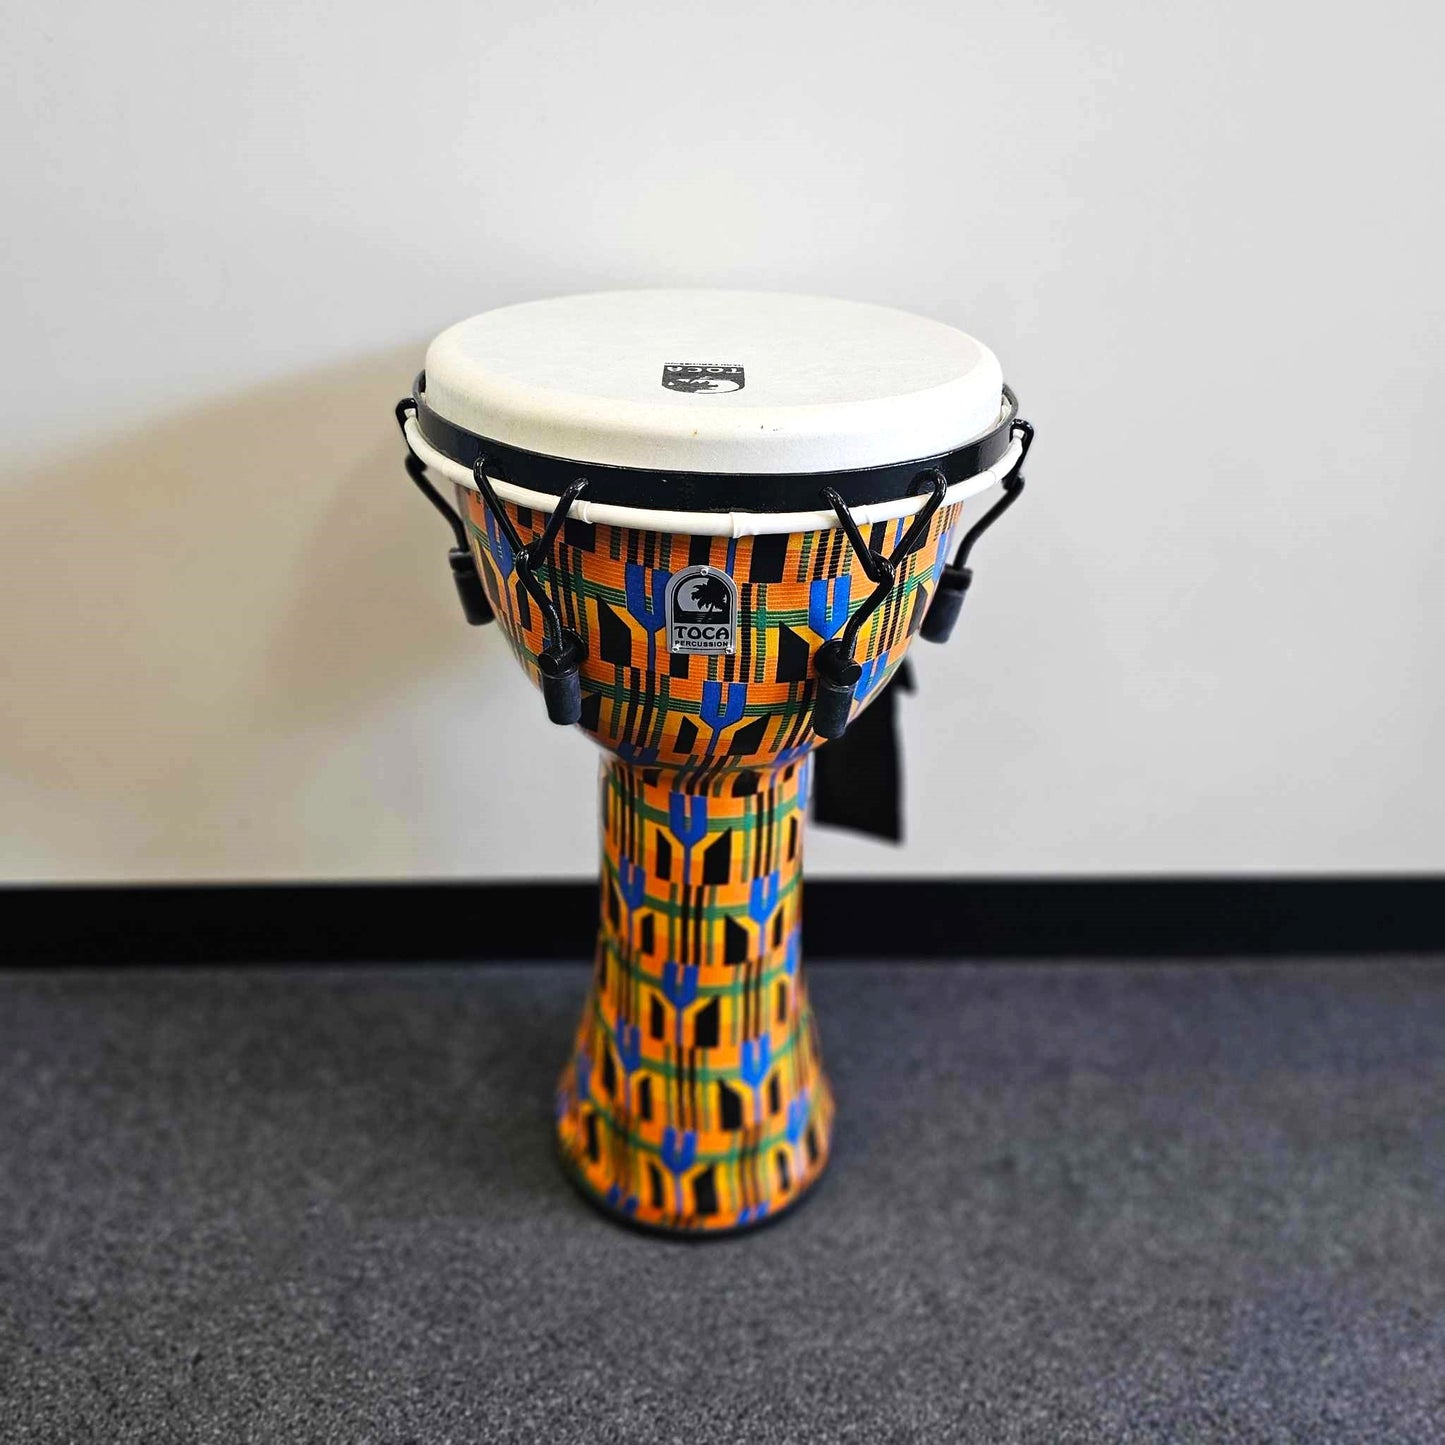 Toca 10" Mech Tuned Freestyle 2 Series Djembe in Kente Cloth Finish